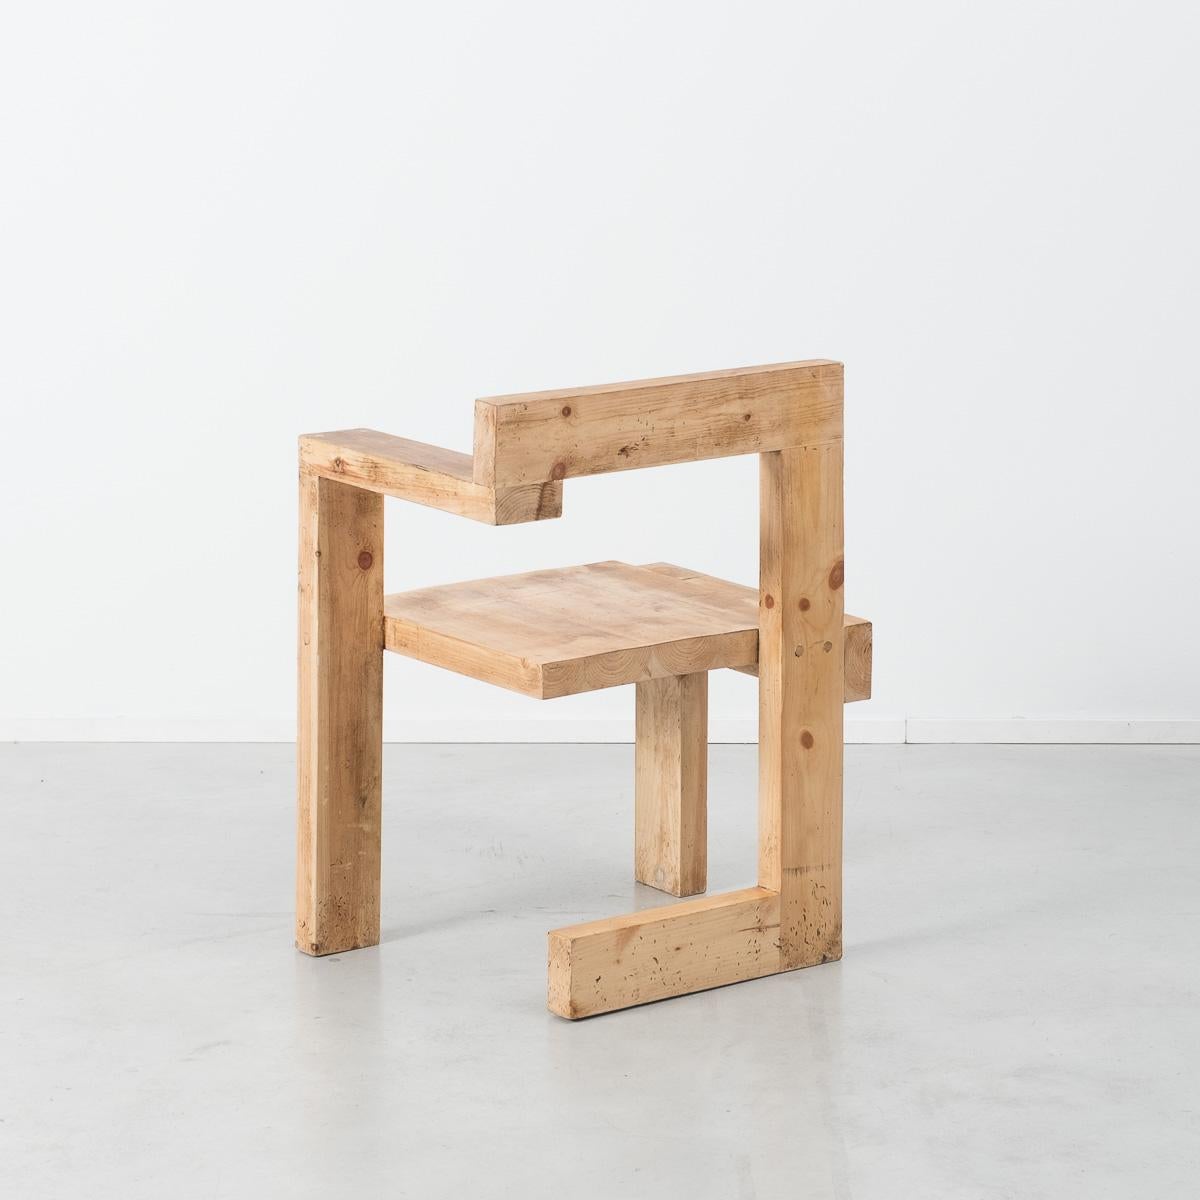 Mid-Century Modern Steltman Chair by Gerrit Rietveld, Producer Unknown, Late 20th Century